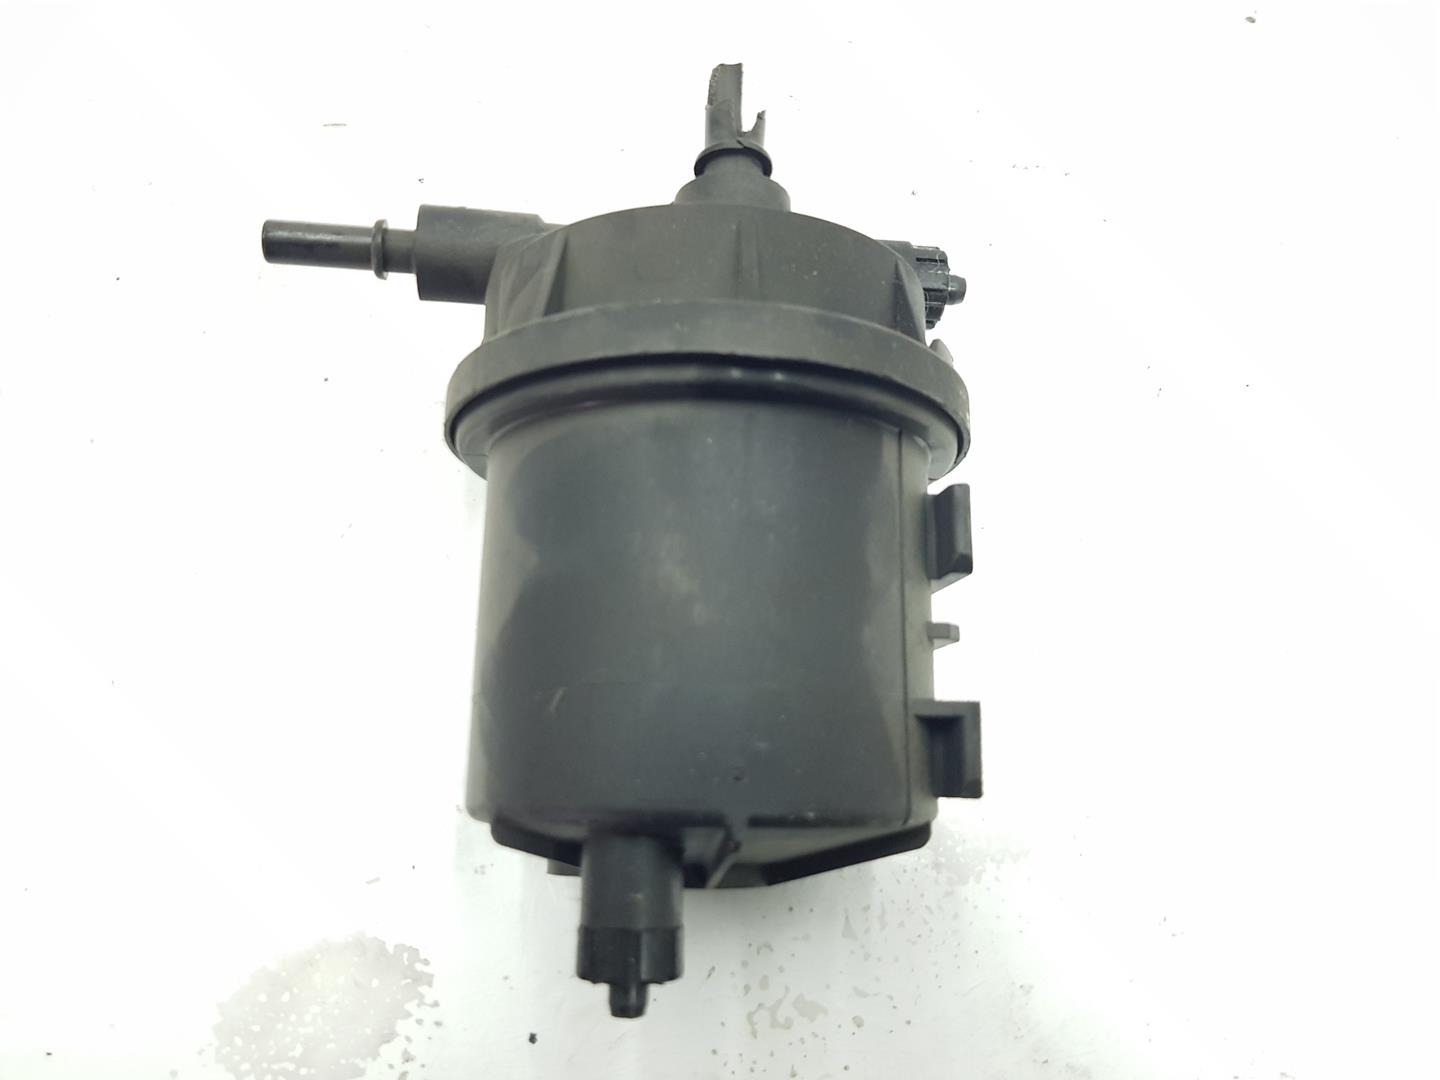 RENAULT Kangoo 1 generation (1998-2009) Other Engine Compartment Parts 7700116169, 6610964161 19808616